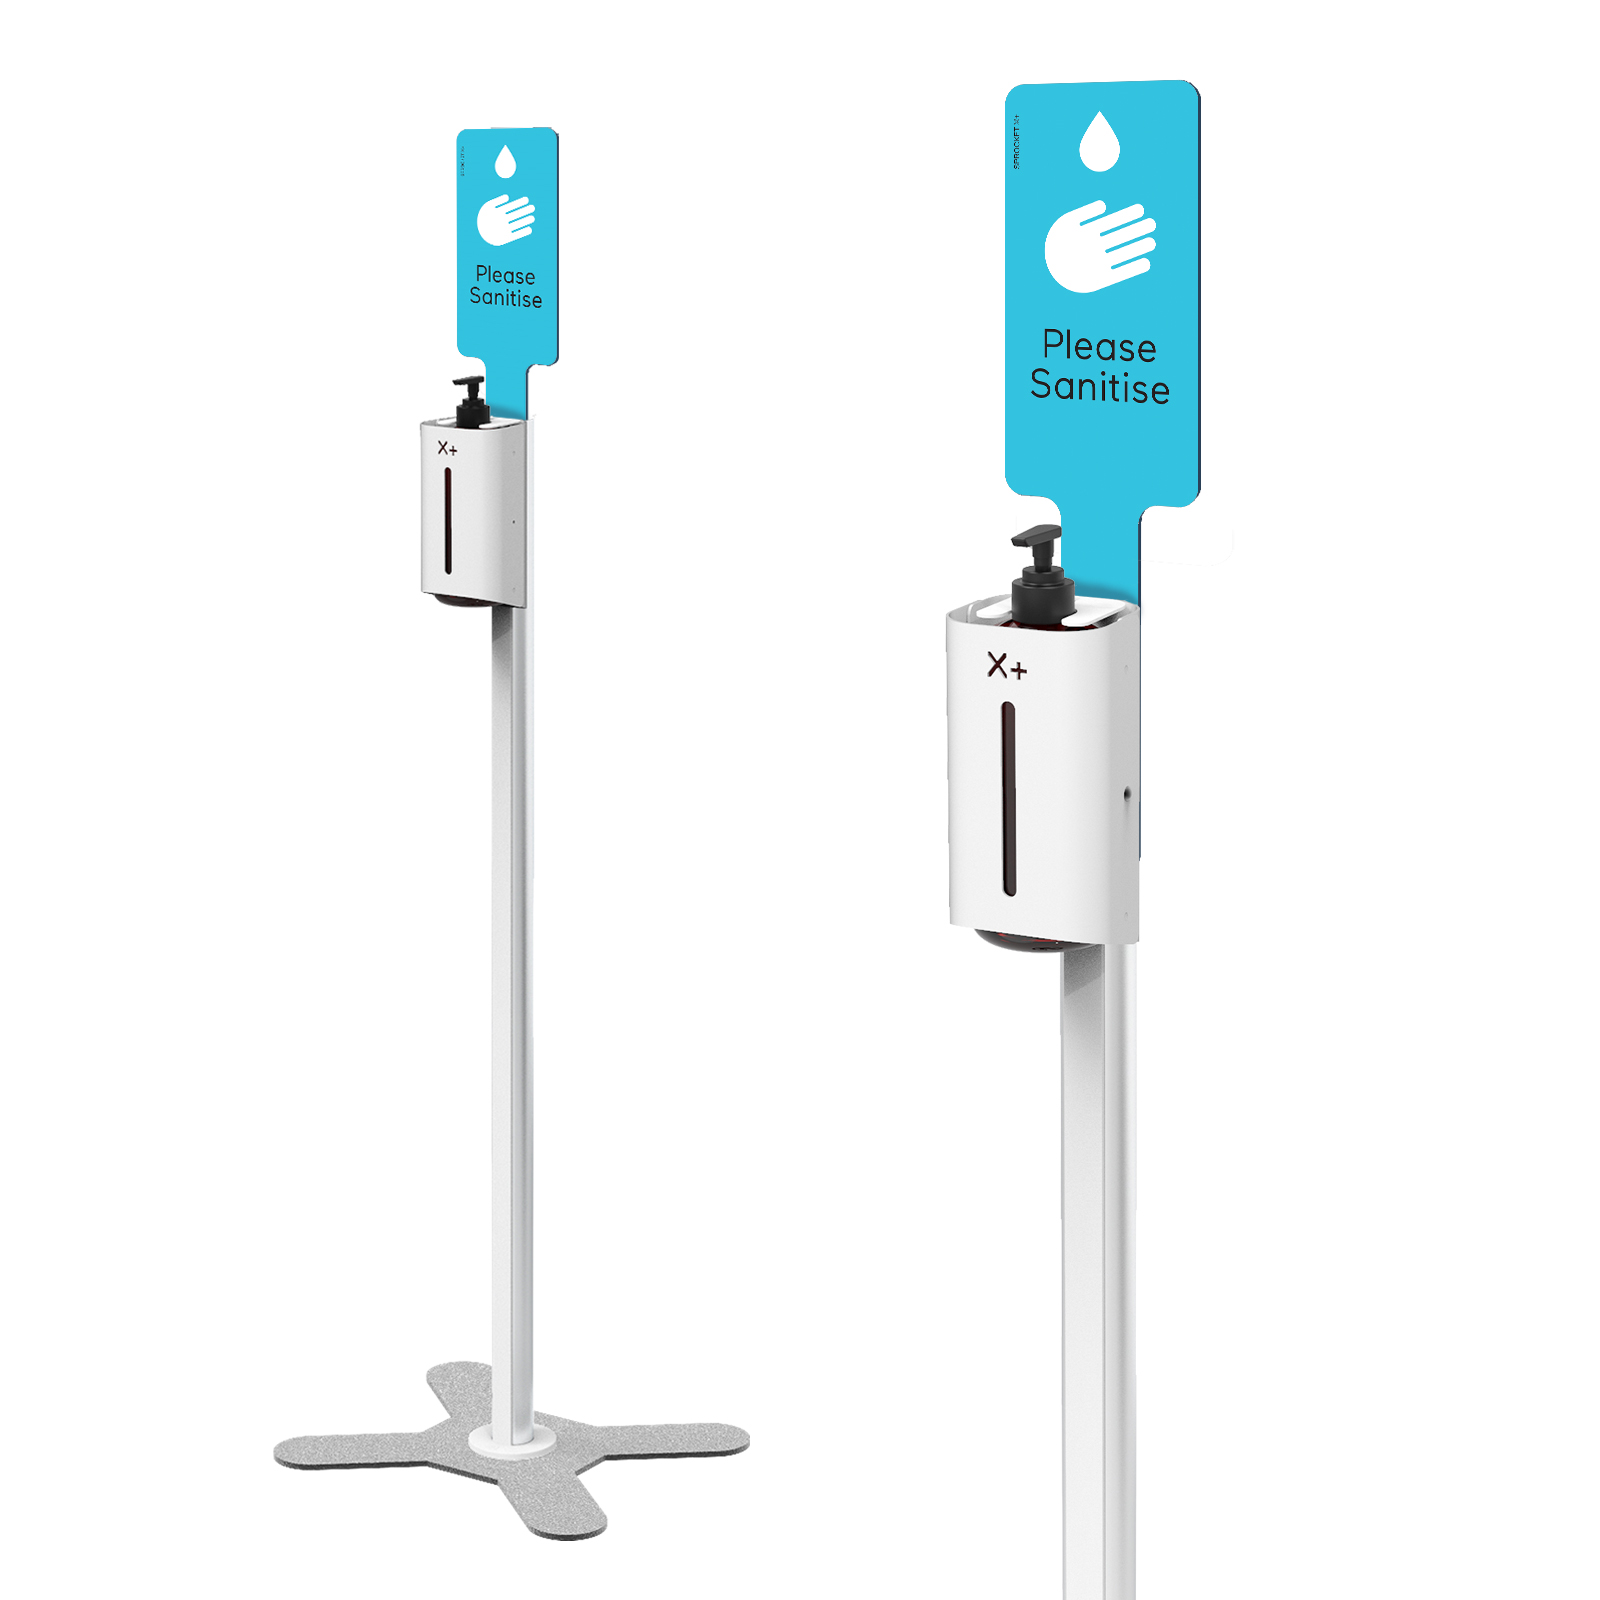 X+ Hand Sanitiser Floor Stand Overall and Close up with Aqua Blue Sign